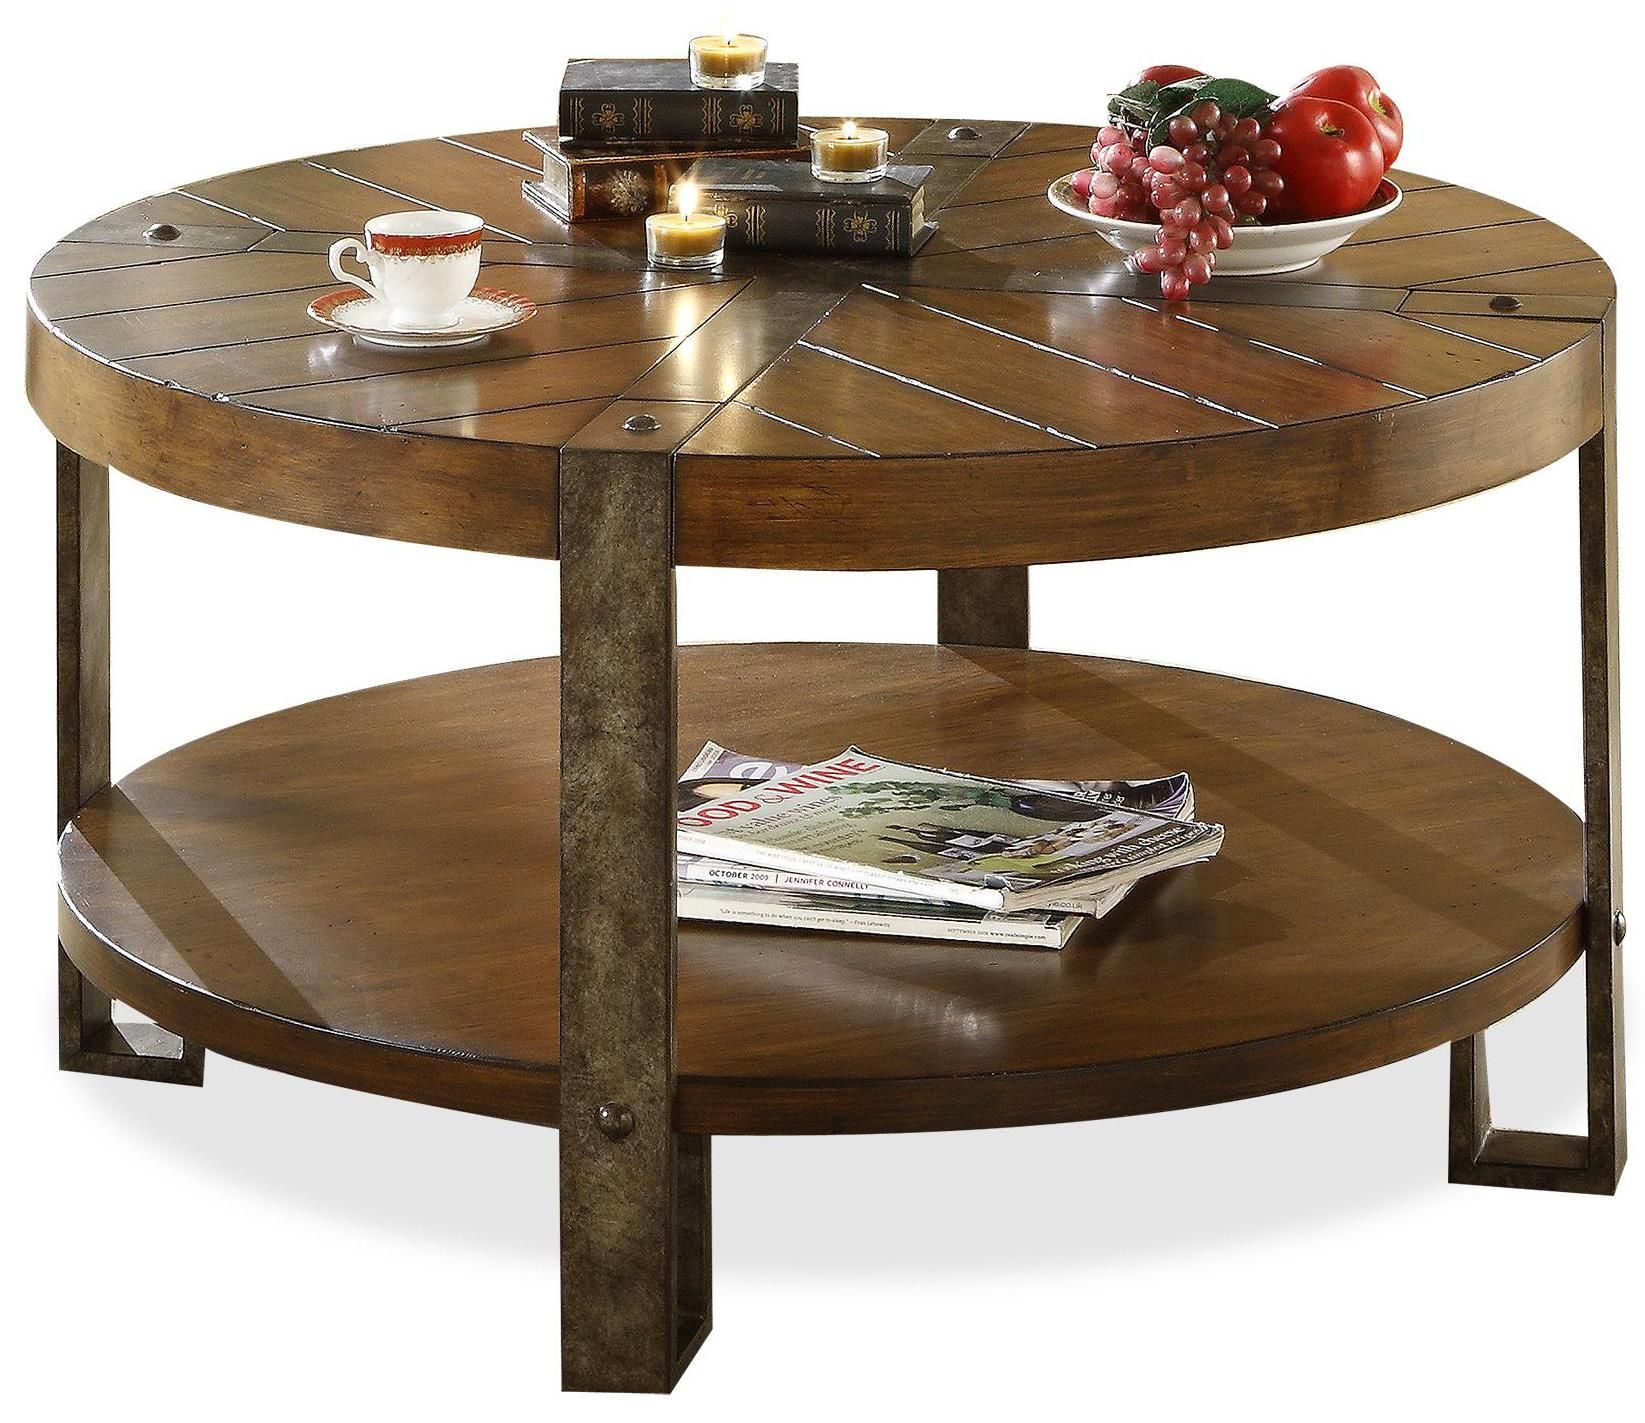 Awesome Round Coffee Tables With Storage | Homesfeed For Coffee Tables For 4 6 People (Gallery 9 of 20)